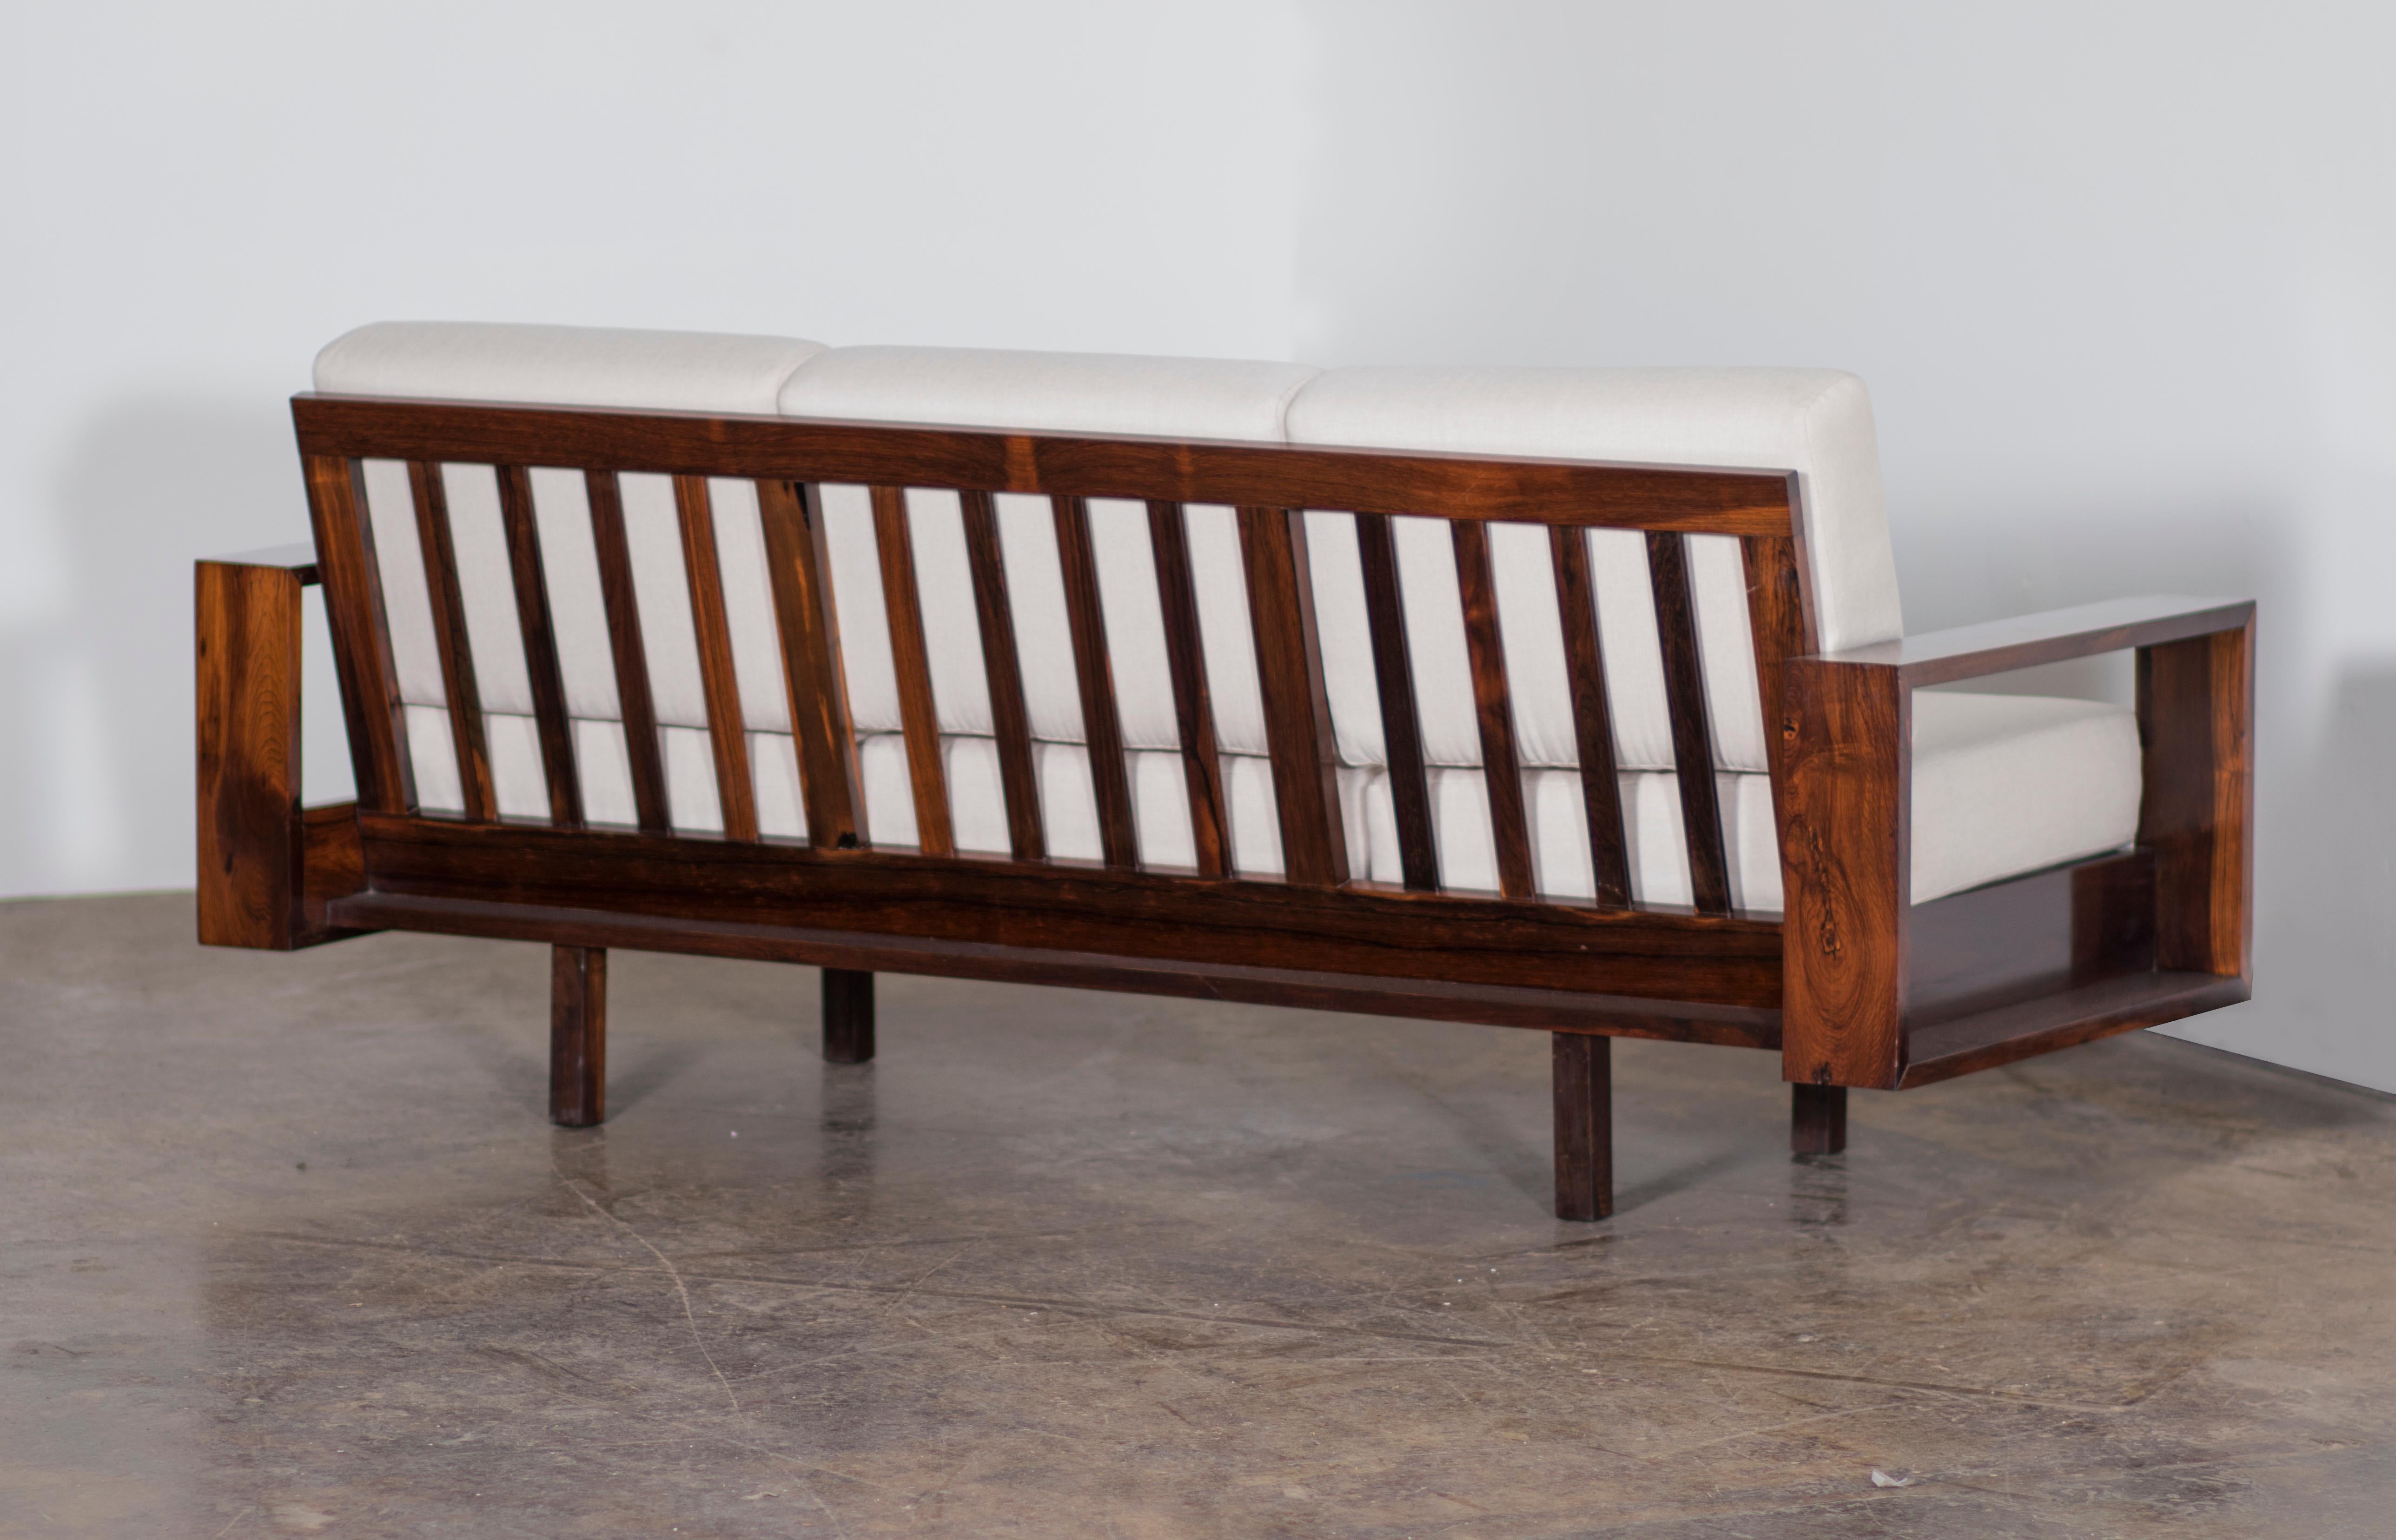 This beautiful sofa is made of solid Brazilian Rosewood (Jacaranda) and recently reupholstered in off white linen by the experienced craftsmen in our team. The armrests have a rectangular design, the back is composed of vertical slats, and the base